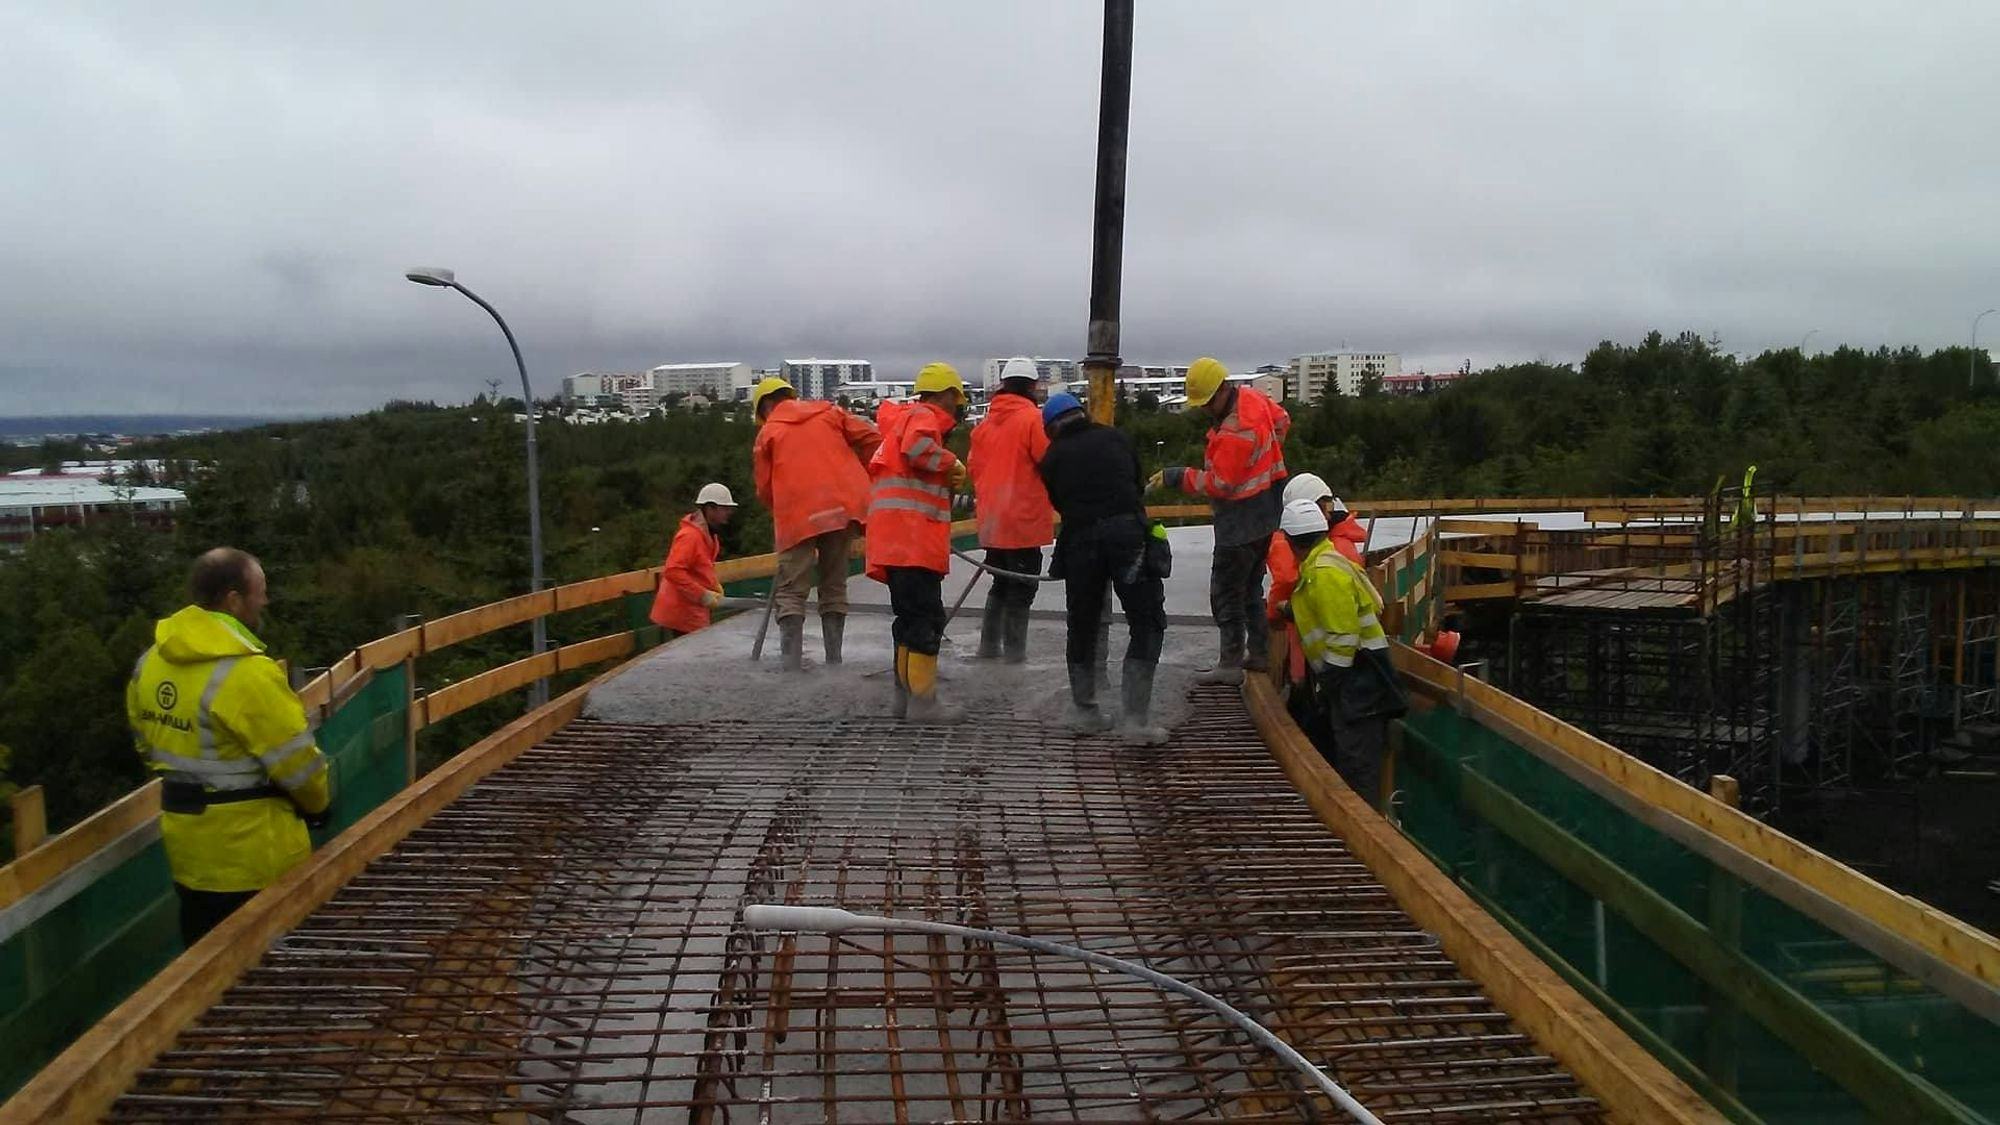 Group of construction workers walking on a bridge with exposed rebar